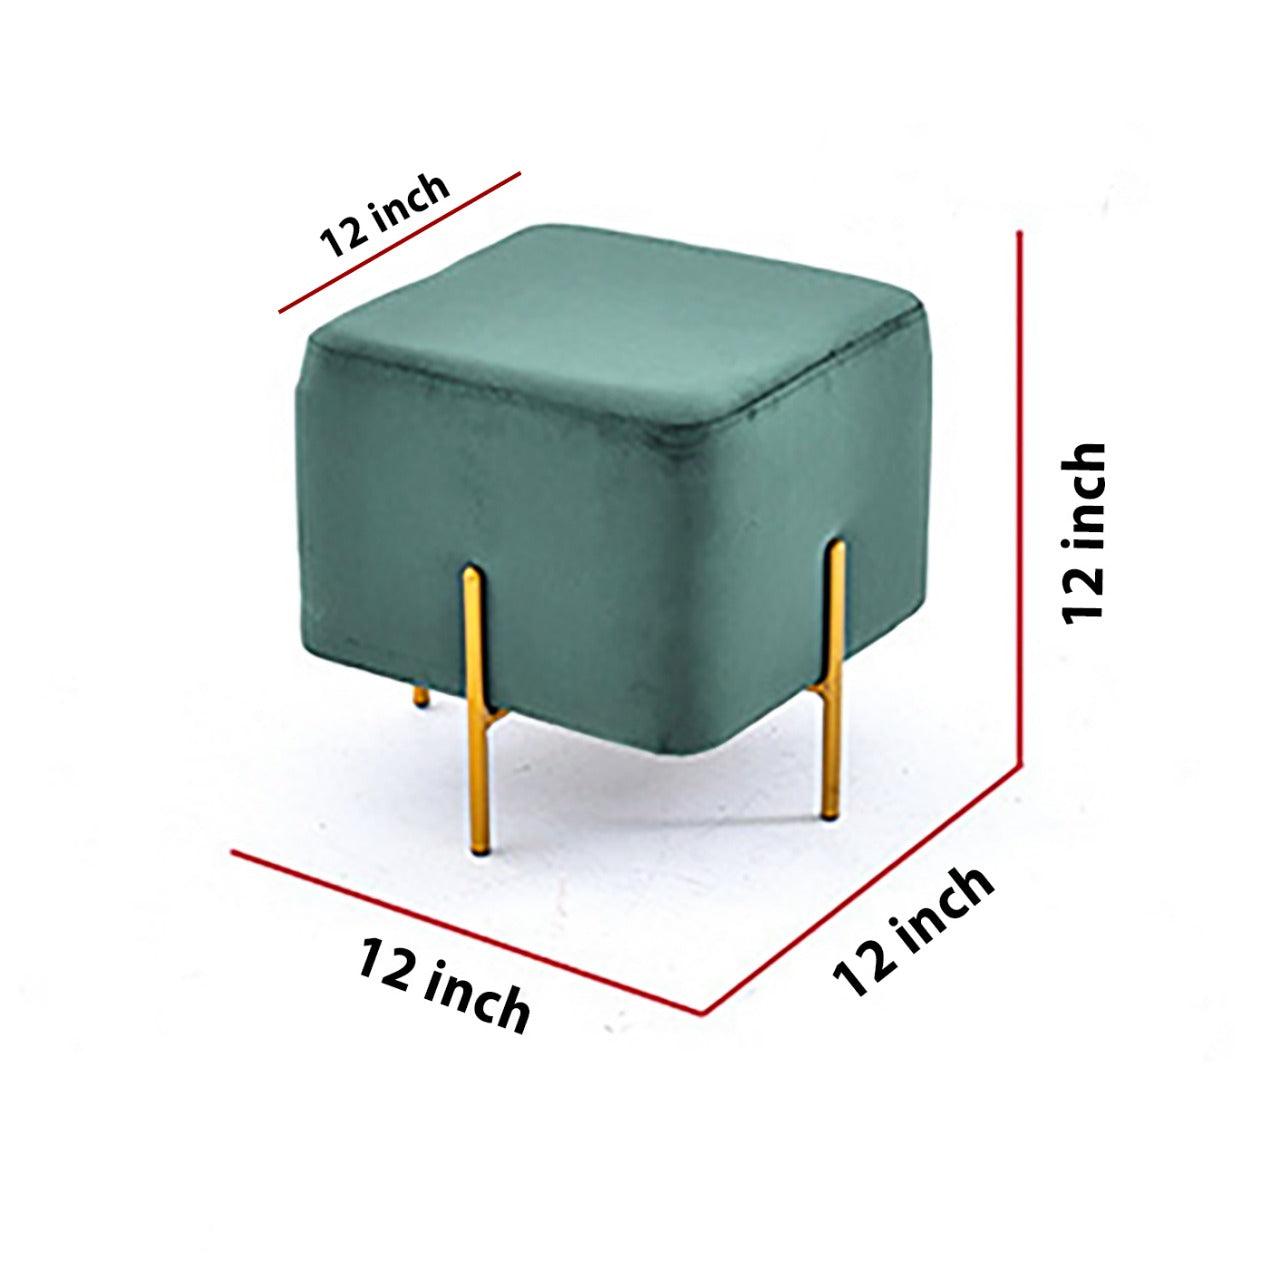 Wooden stool Square shape With Steel Stand - 155 - 92Bedding